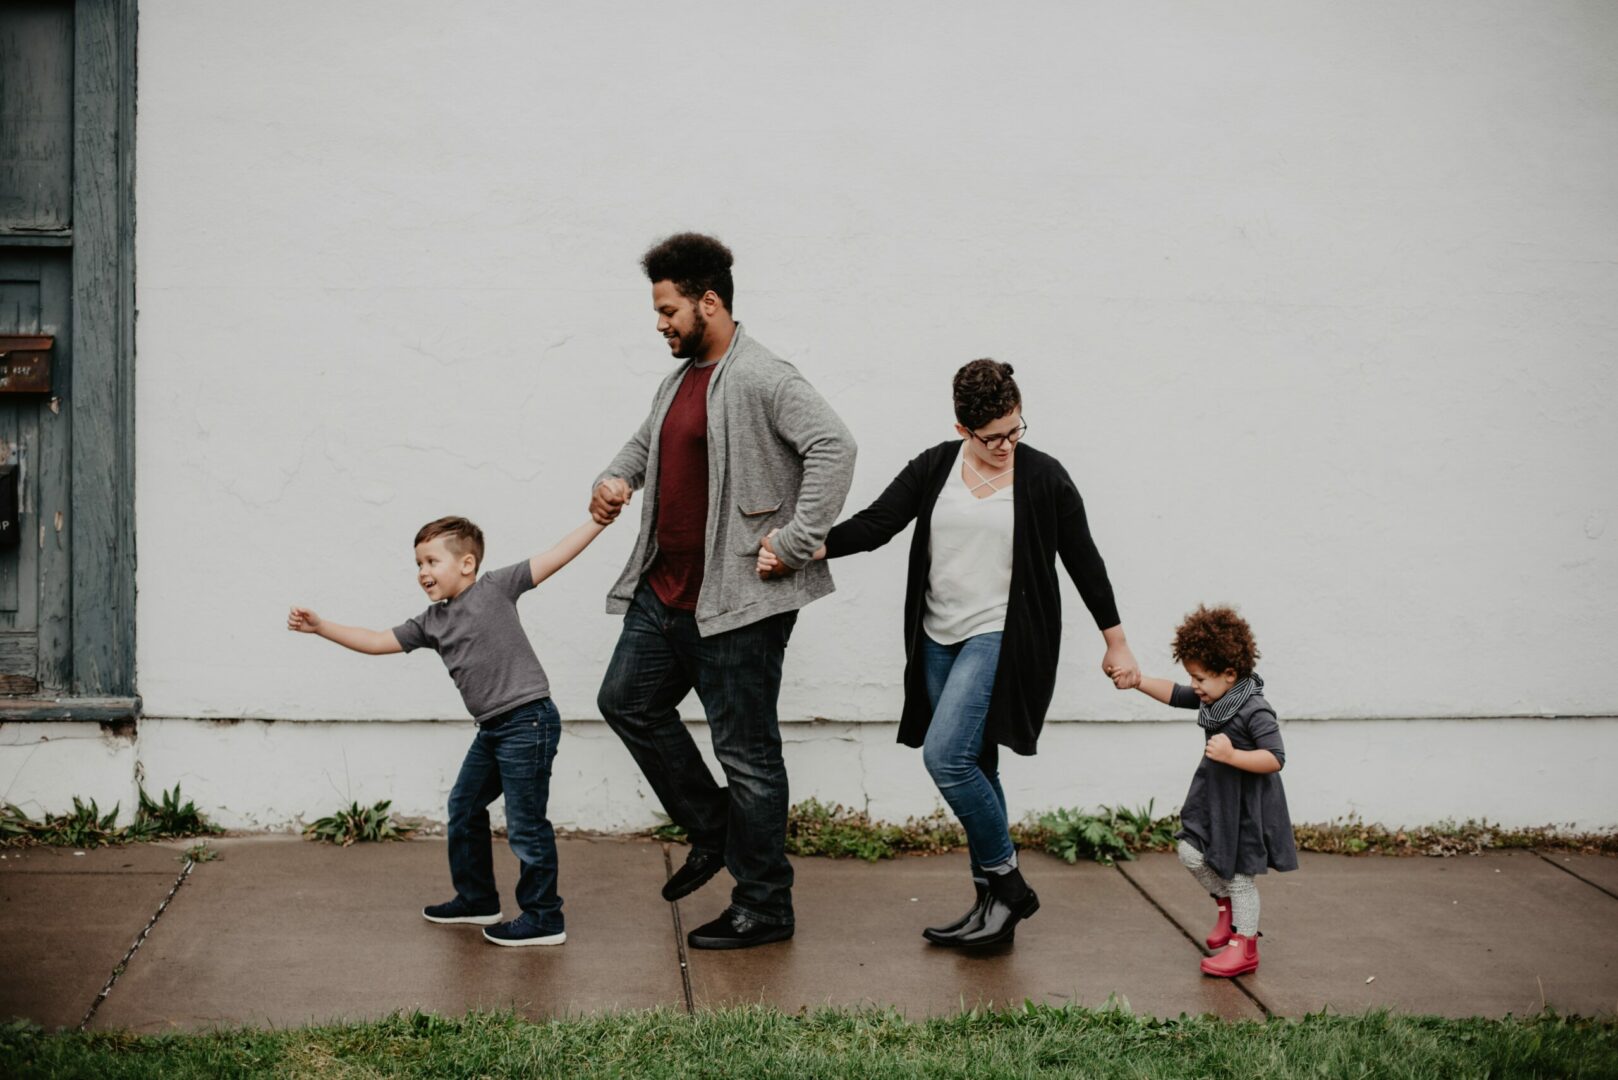 A family walking down the sidewalk holding hands.